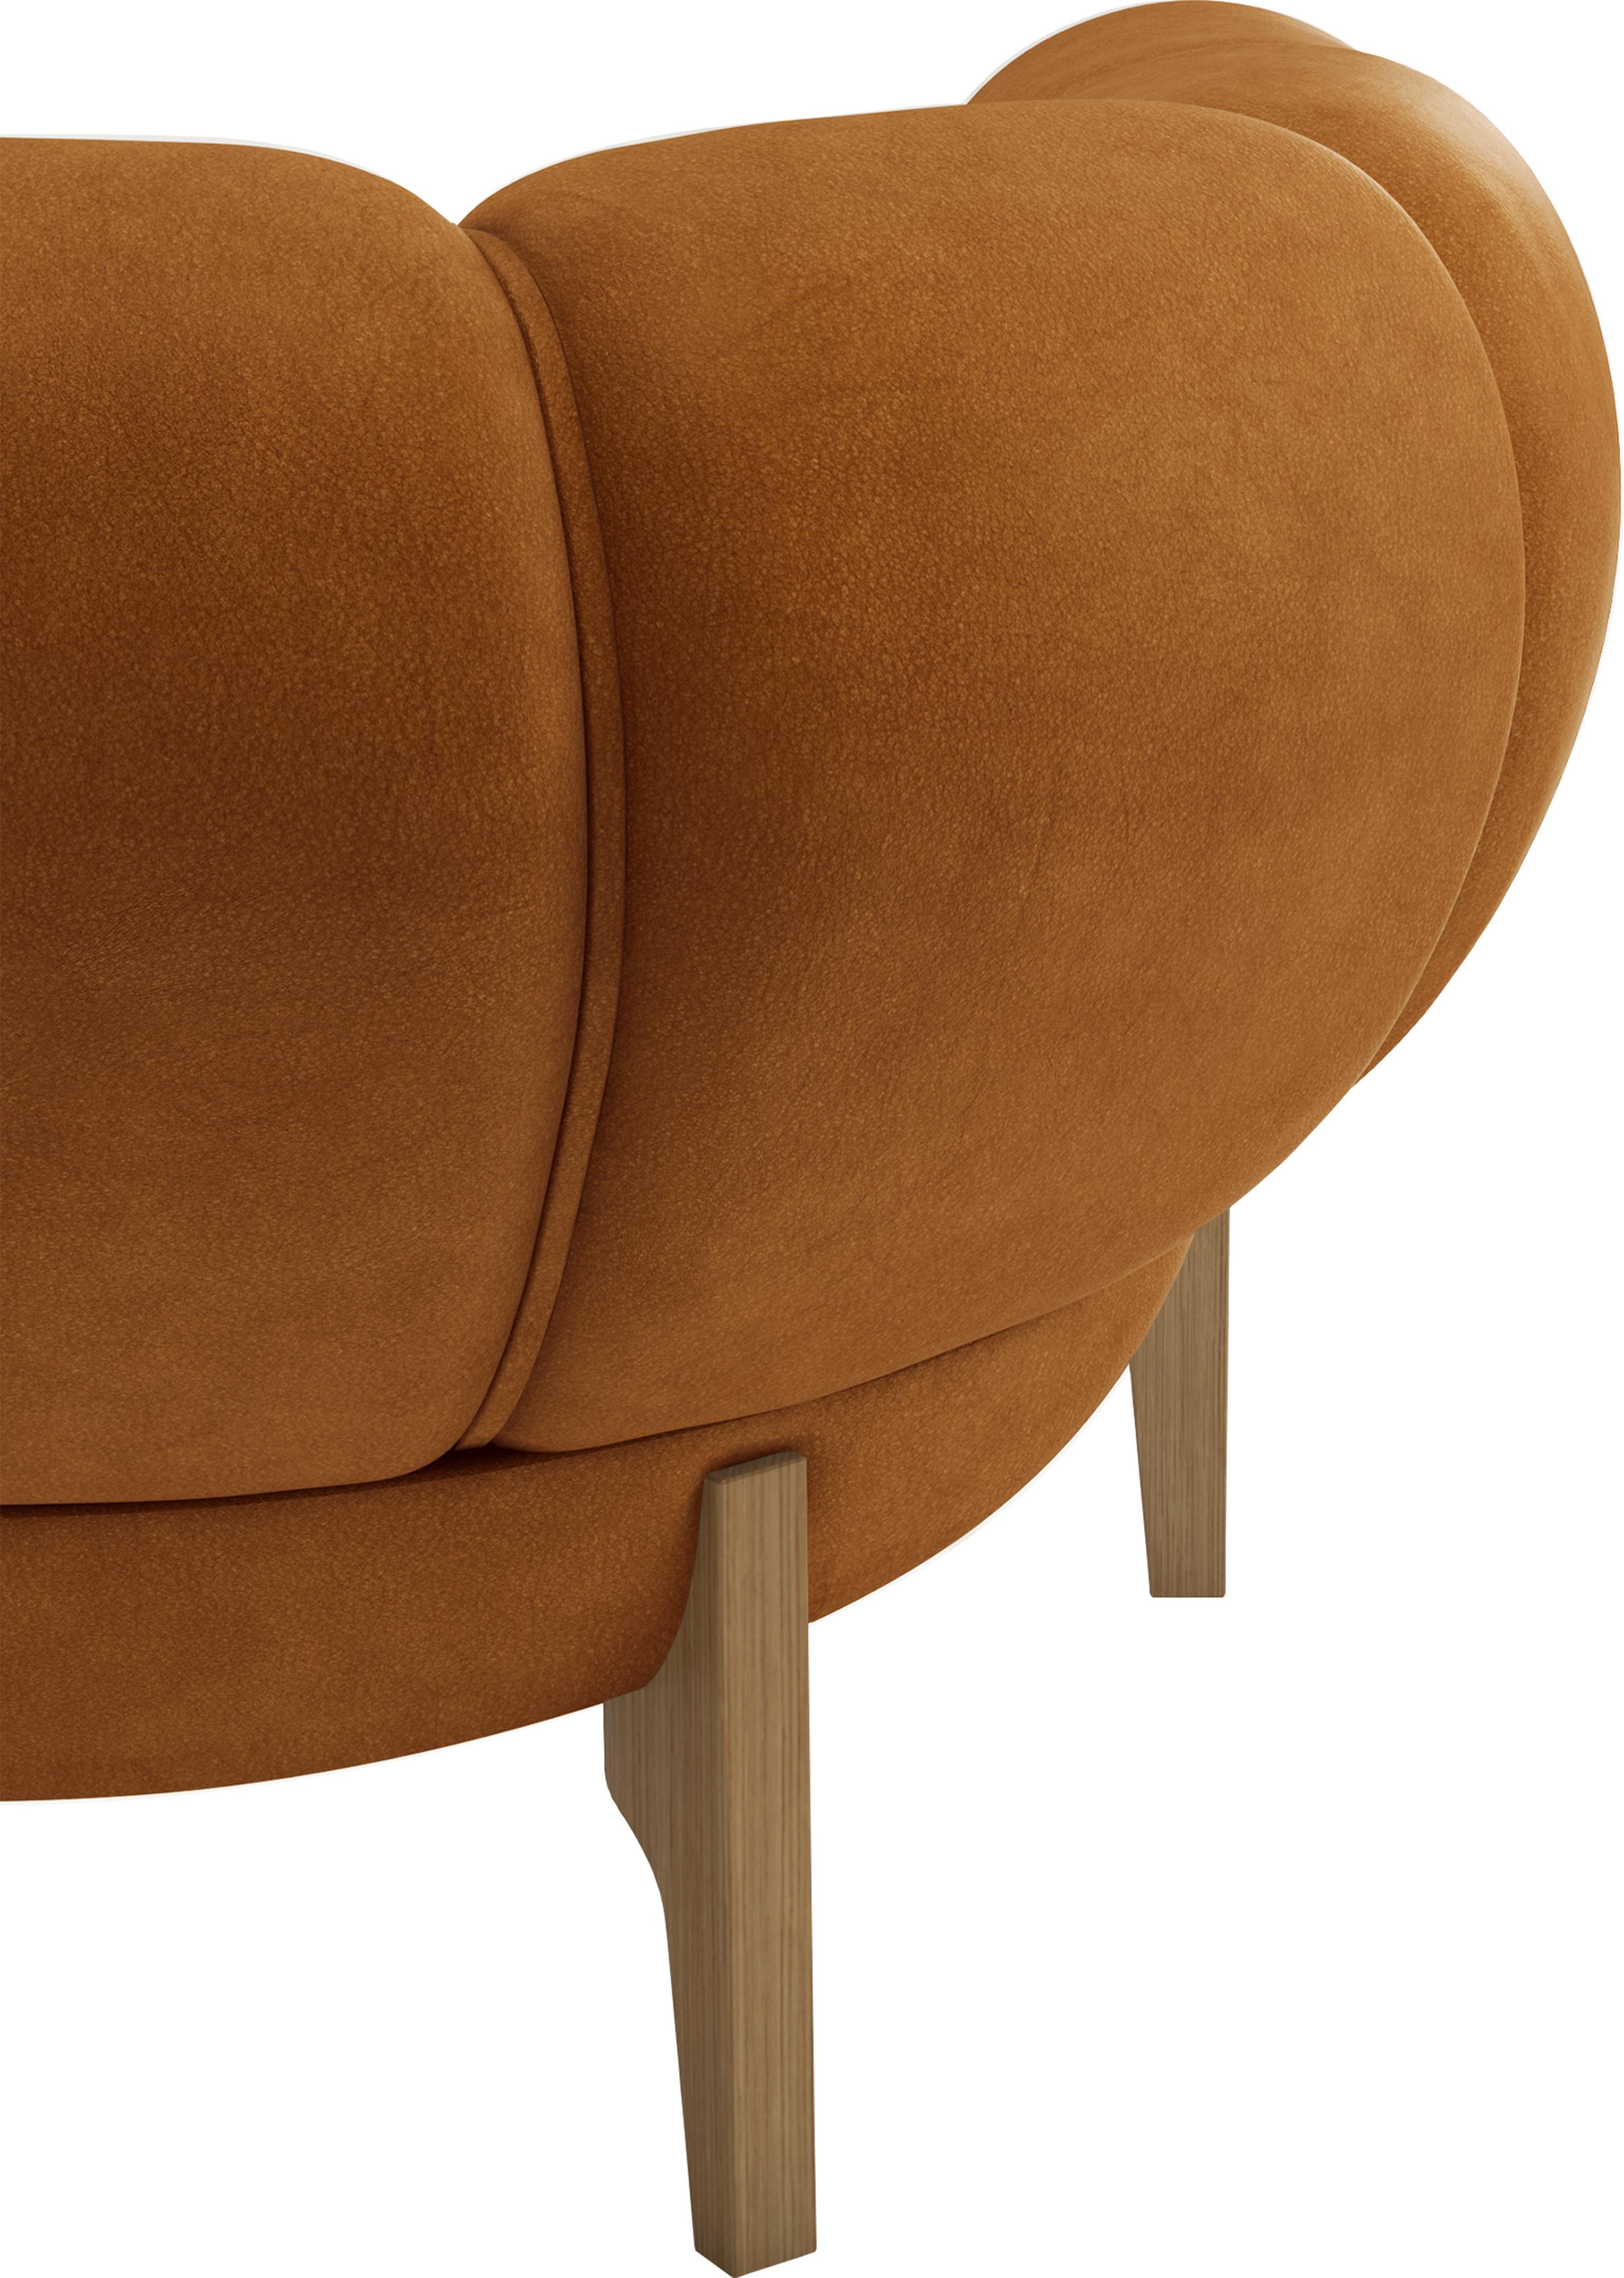 Leather 'Croissant' Sofa by Illum Wikkelsø for Gubi with Walnut Legs For Sale 7